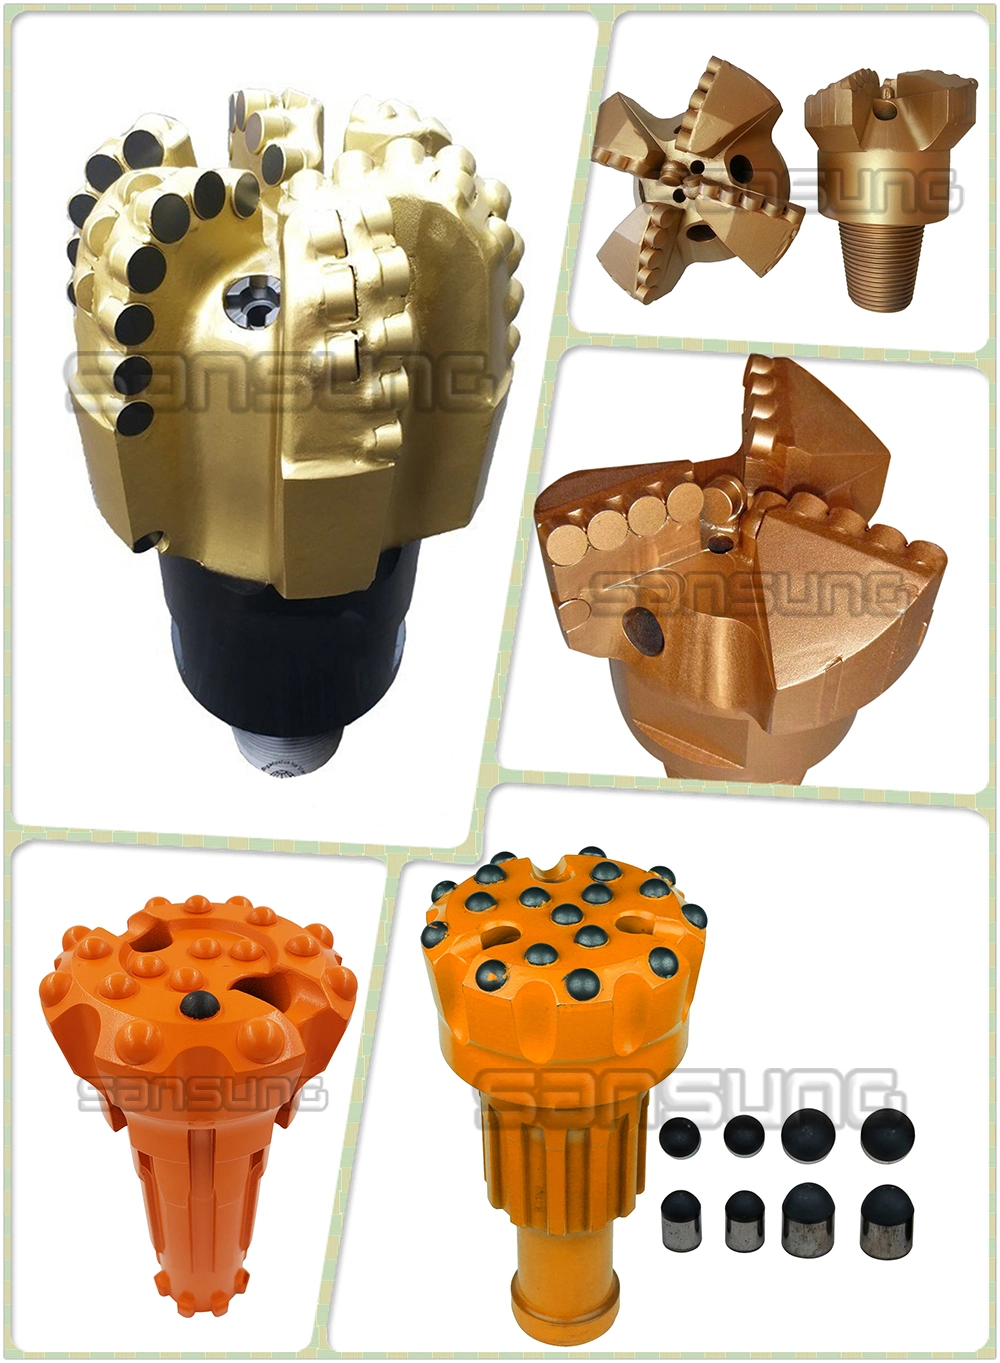 PDC Reamer Bit Diamond Rock Cutters 13mm PDC Cutter for Mining and Well Drilling